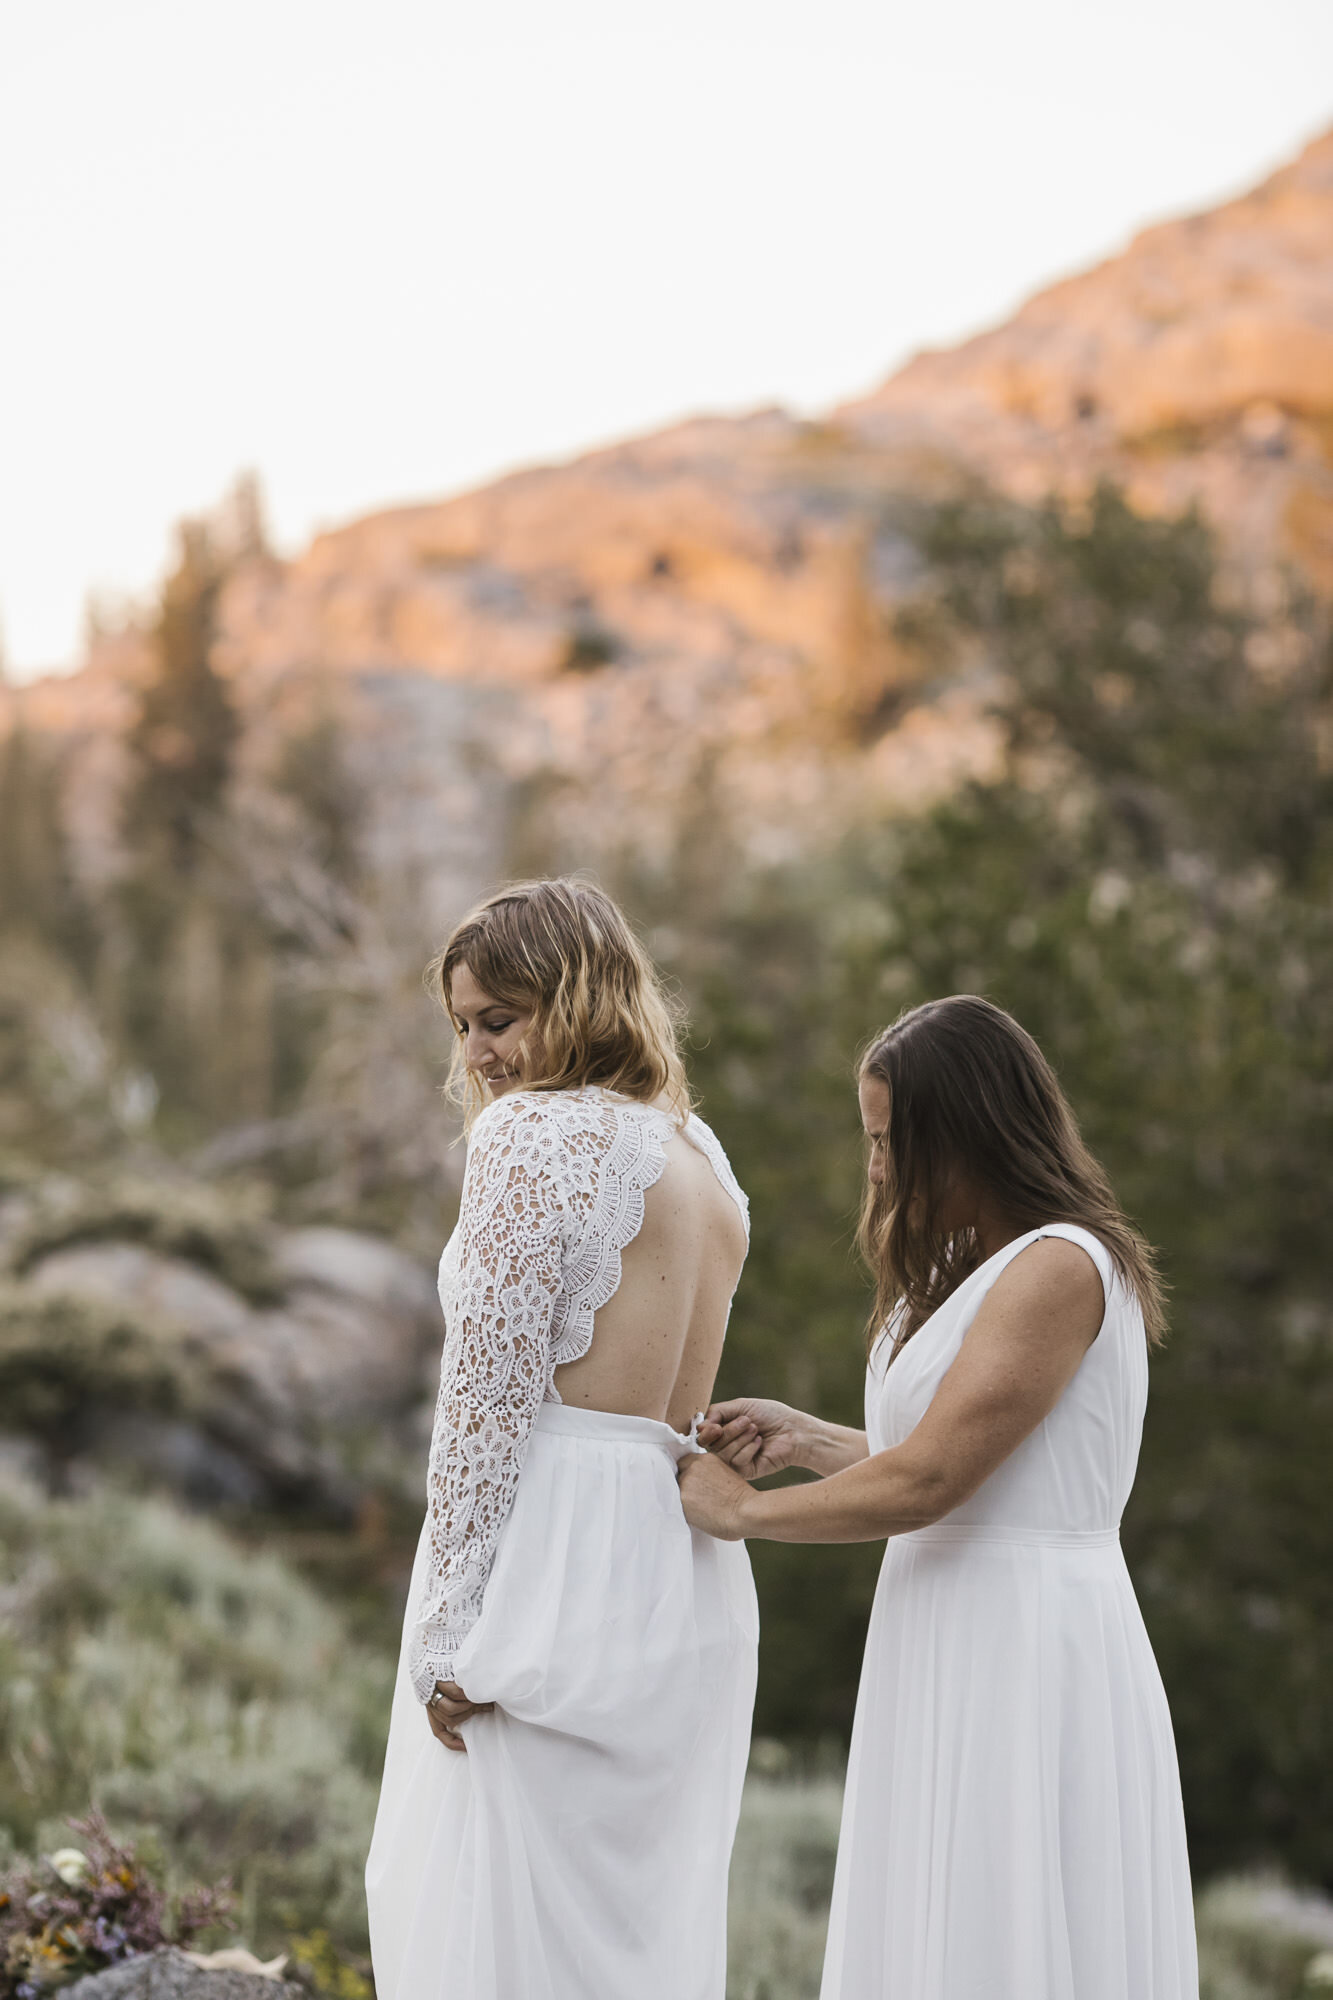 Brides help each other get dressed during their backpacking elopement in the mountains